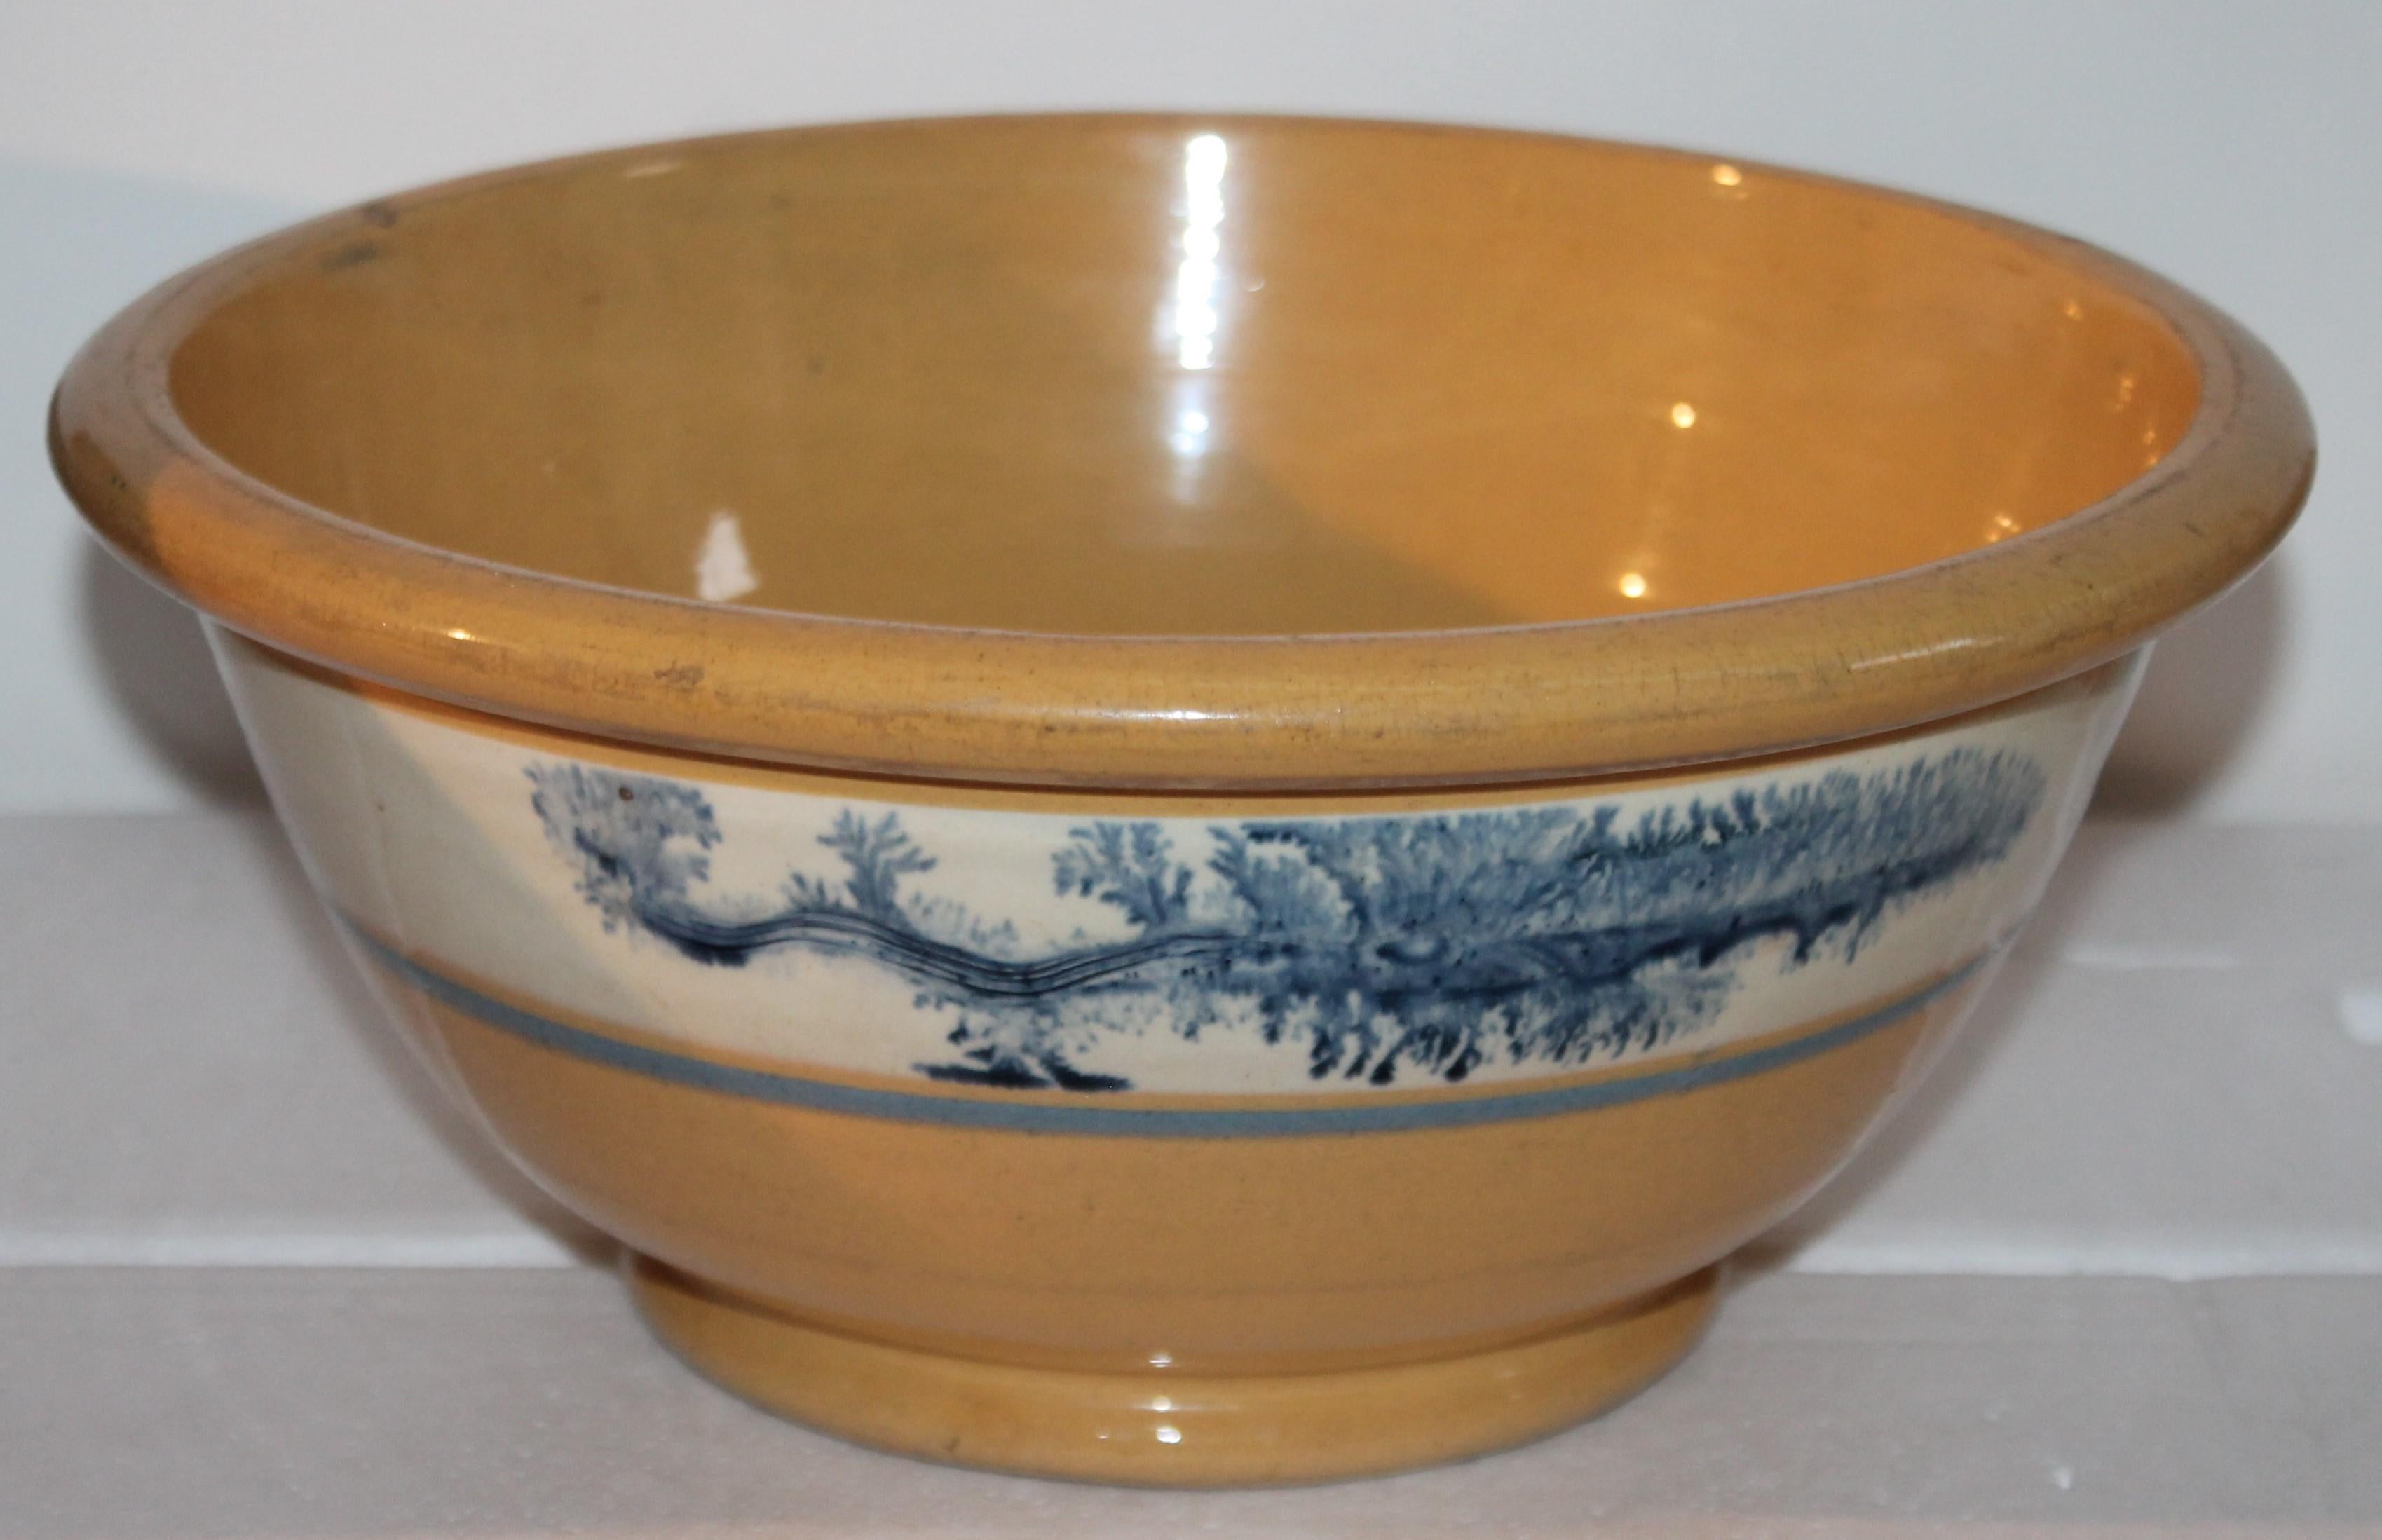 Glazed Collection of Three 19th Century Mocha Yellow Ware Bowls For Sale